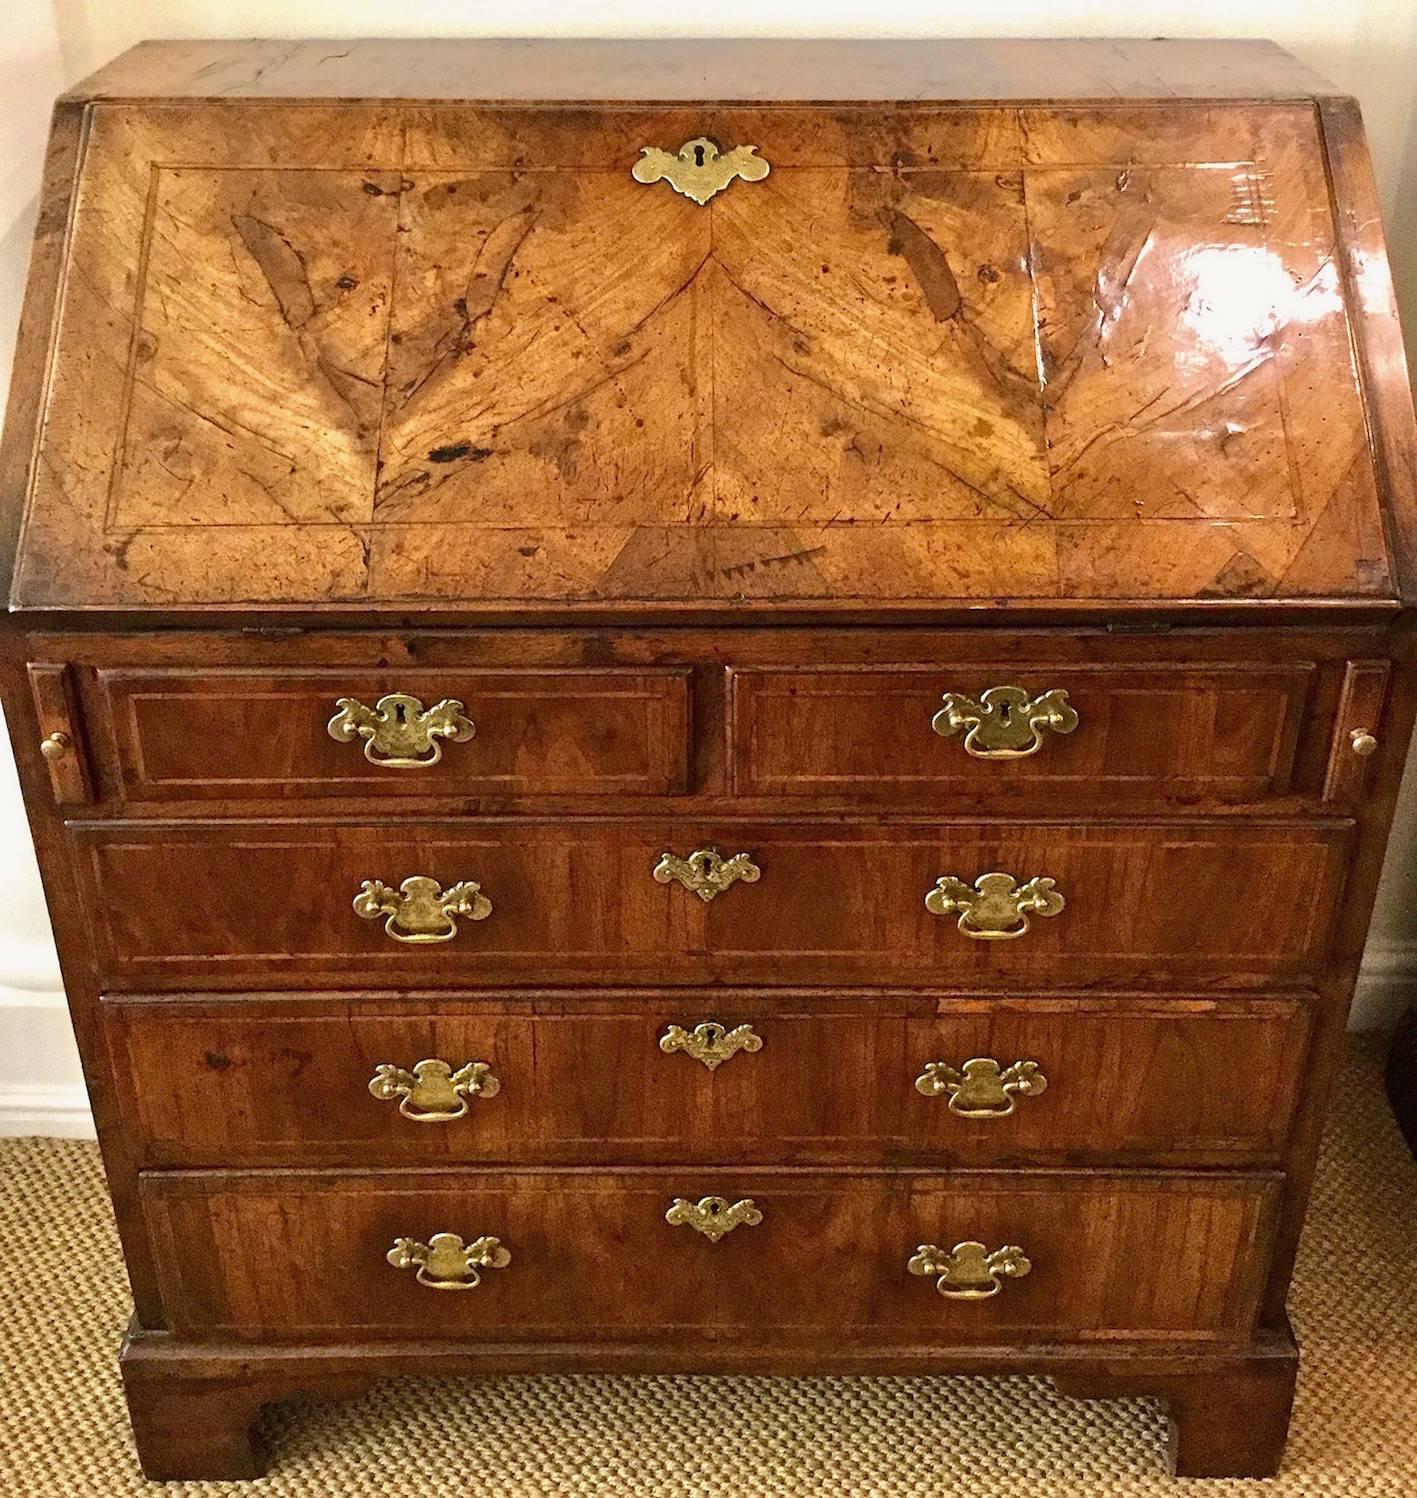 An exceptional 18th century walnut bureau with a rich color. In excellent condition and is therefore a rare find. The top falls to reveal nine pigeon-holes with four narrow paper drawers and four smaller drawers, all with brass knobs. A green beize